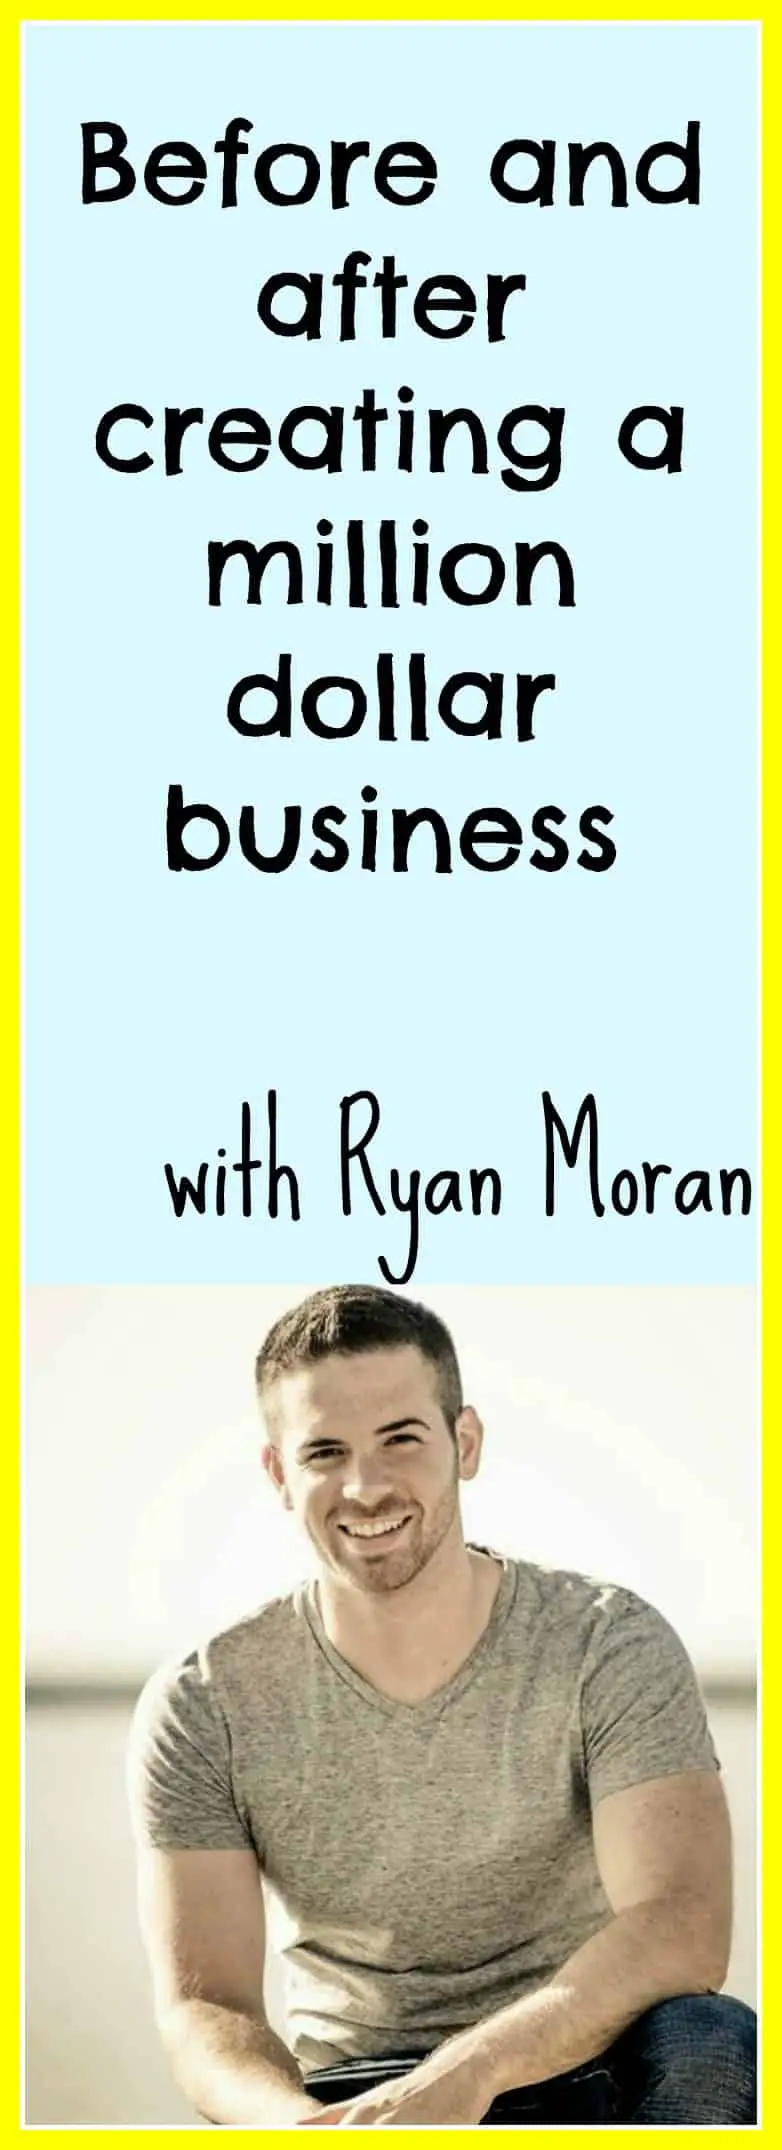 Ryan Moran explains how he created a million dollar business and how he invests his money now. | Follow @rachelrofe for more